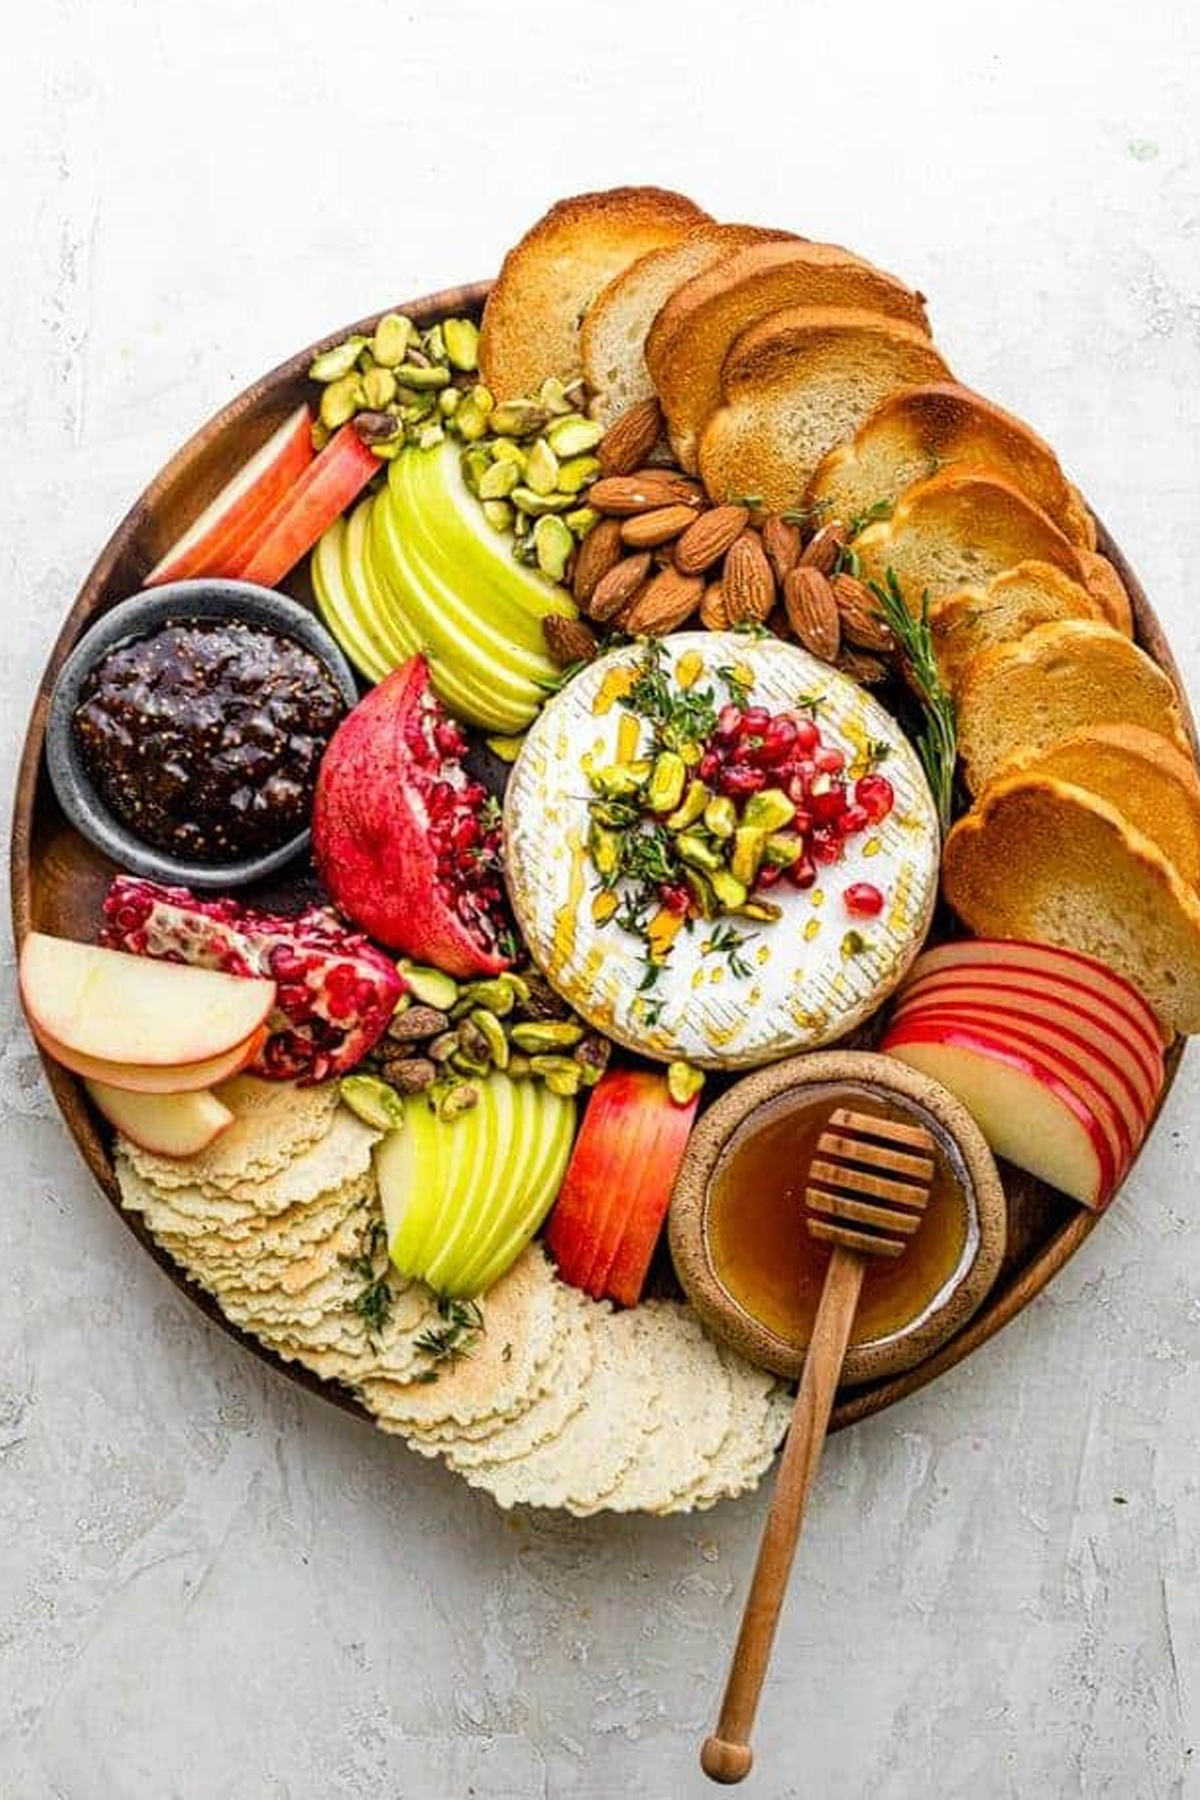 Feel Good Foodie includes, apples, honey, almonds, pomegranates, bread, and a baked brie ball on their charcuterie board.